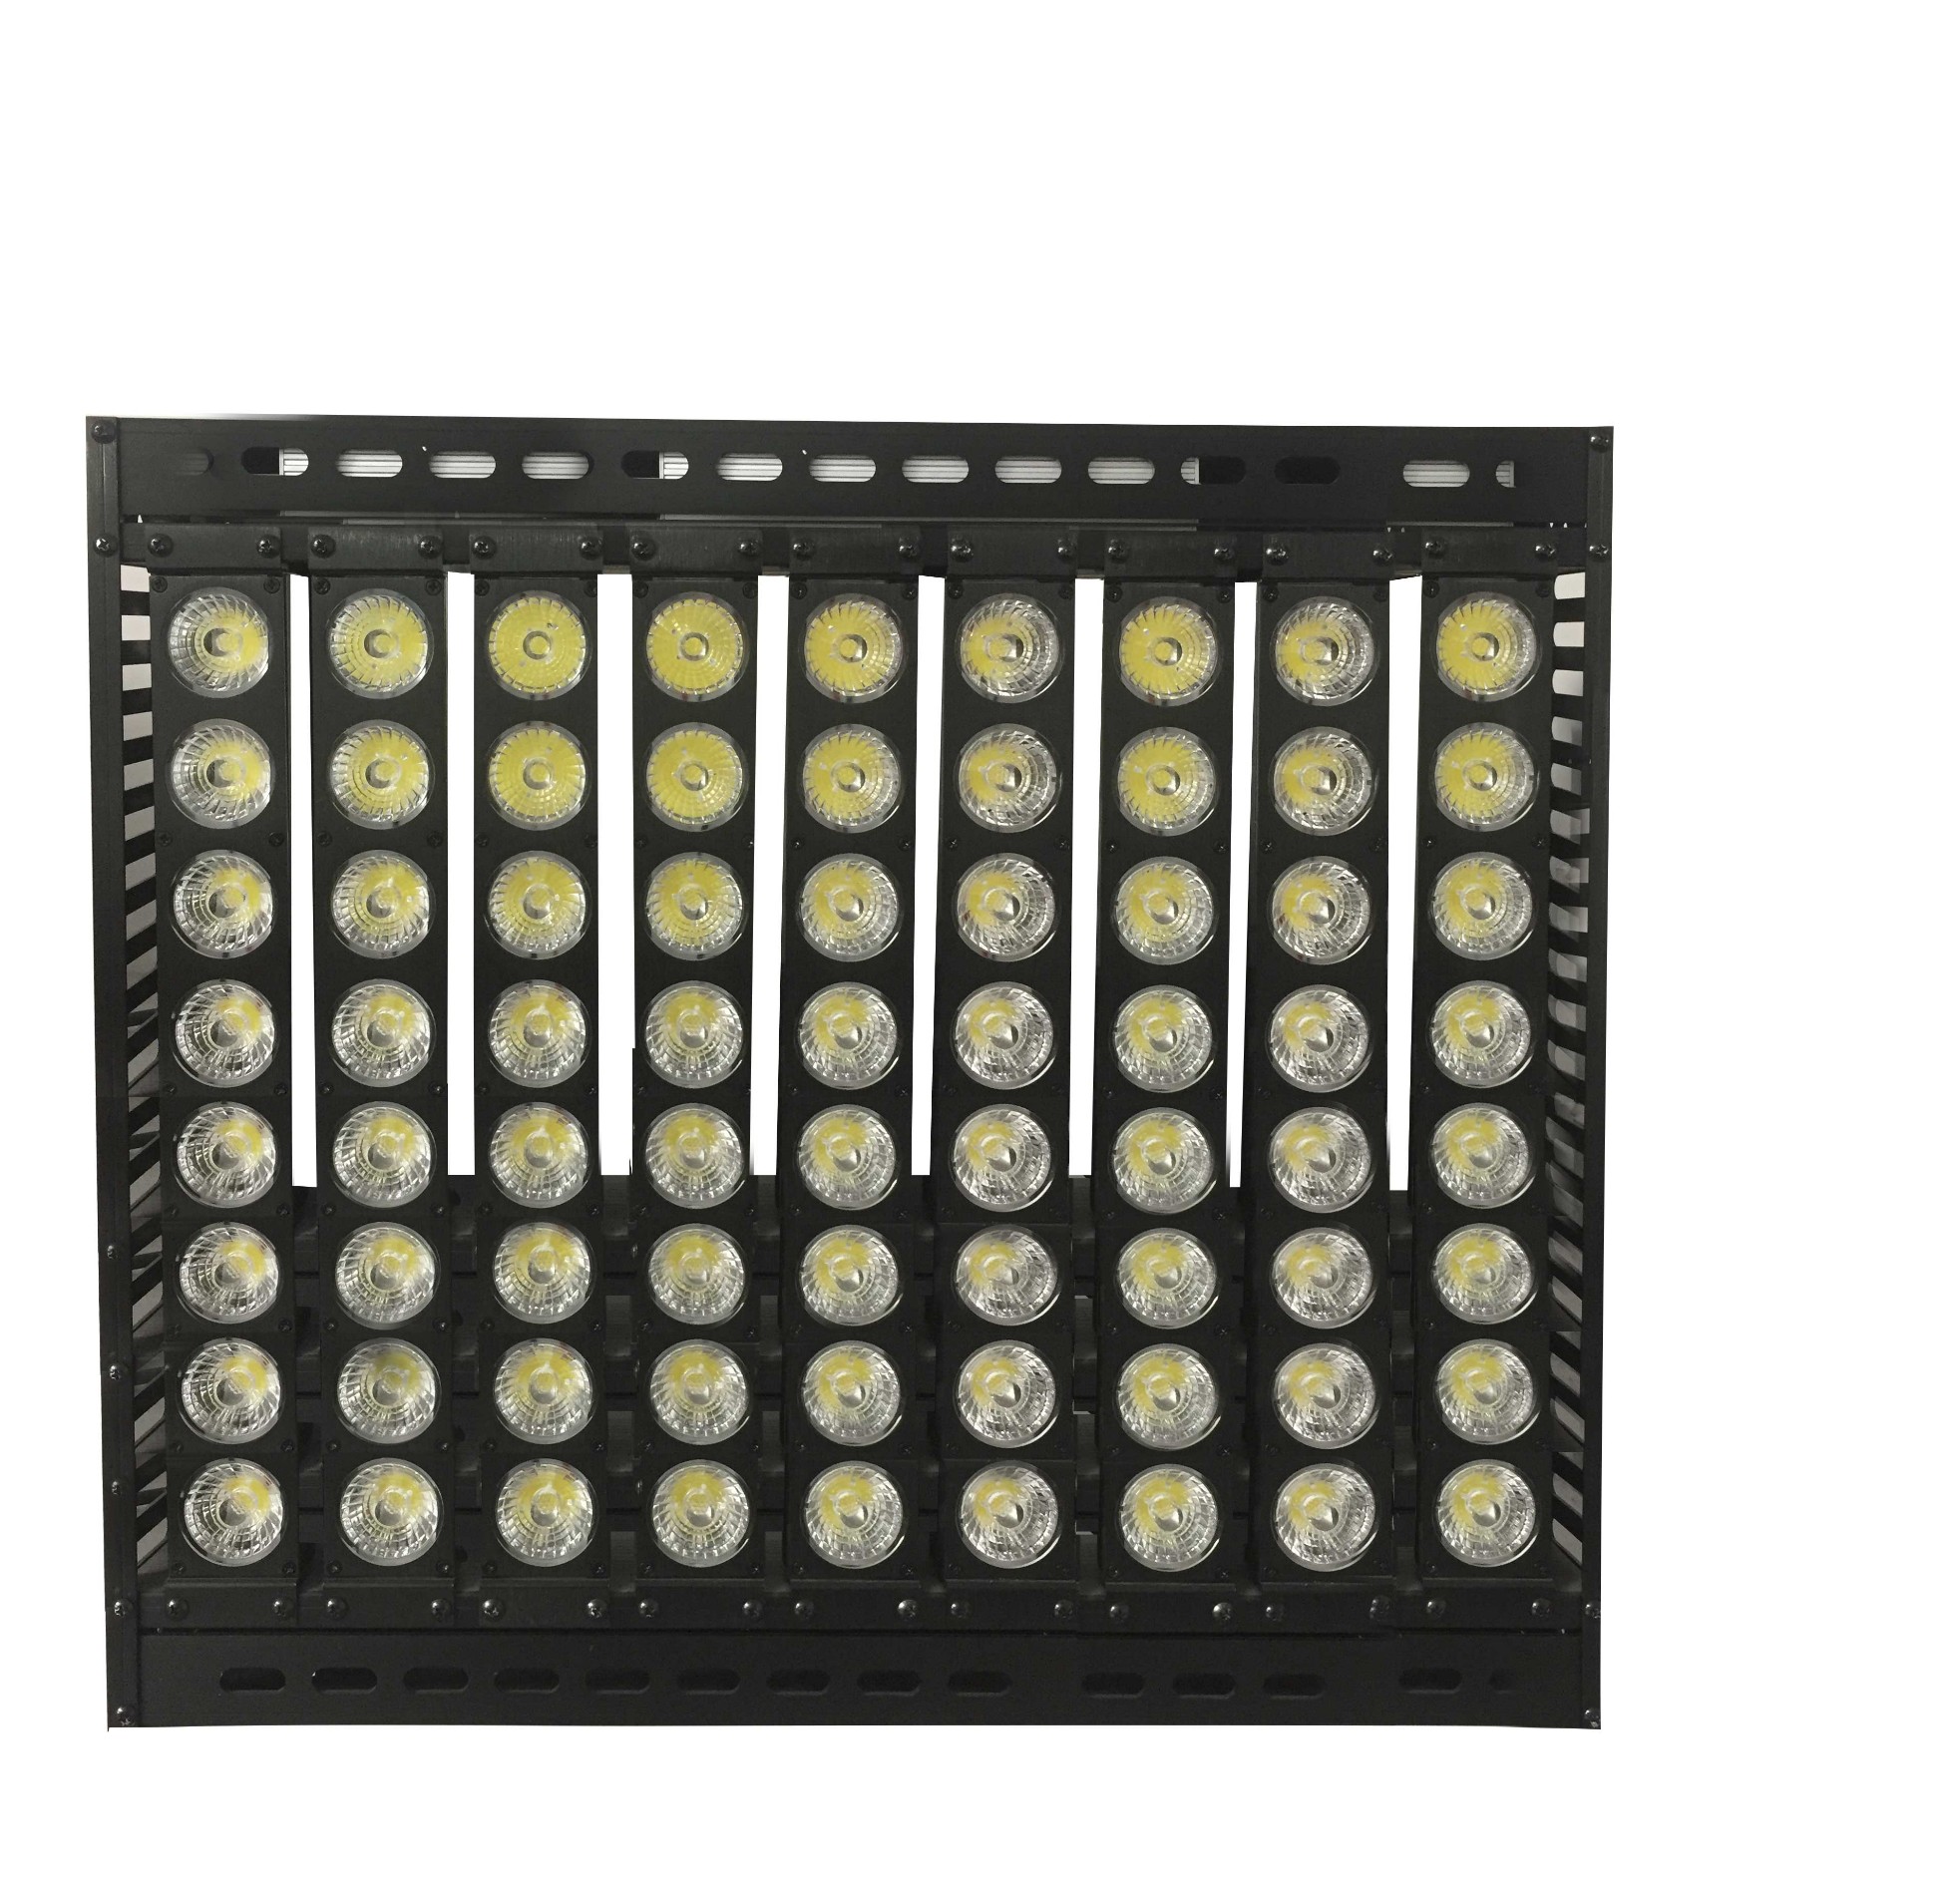 Acheter 720W Dimmable Outdoor Led Flood Sport Luminaires,720W Dimmable Outdoor Led Flood Sport Luminaires Prix,720W Dimmable Outdoor Led Flood Sport Luminaires Marques,720W Dimmable Outdoor Led Flood Sport Luminaires Fabricant,720W Dimmable Outdoor Led Flood Sport Luminaires Quotes,720W Dimmable Outdoor Led Flood Sport Luminaires Société,